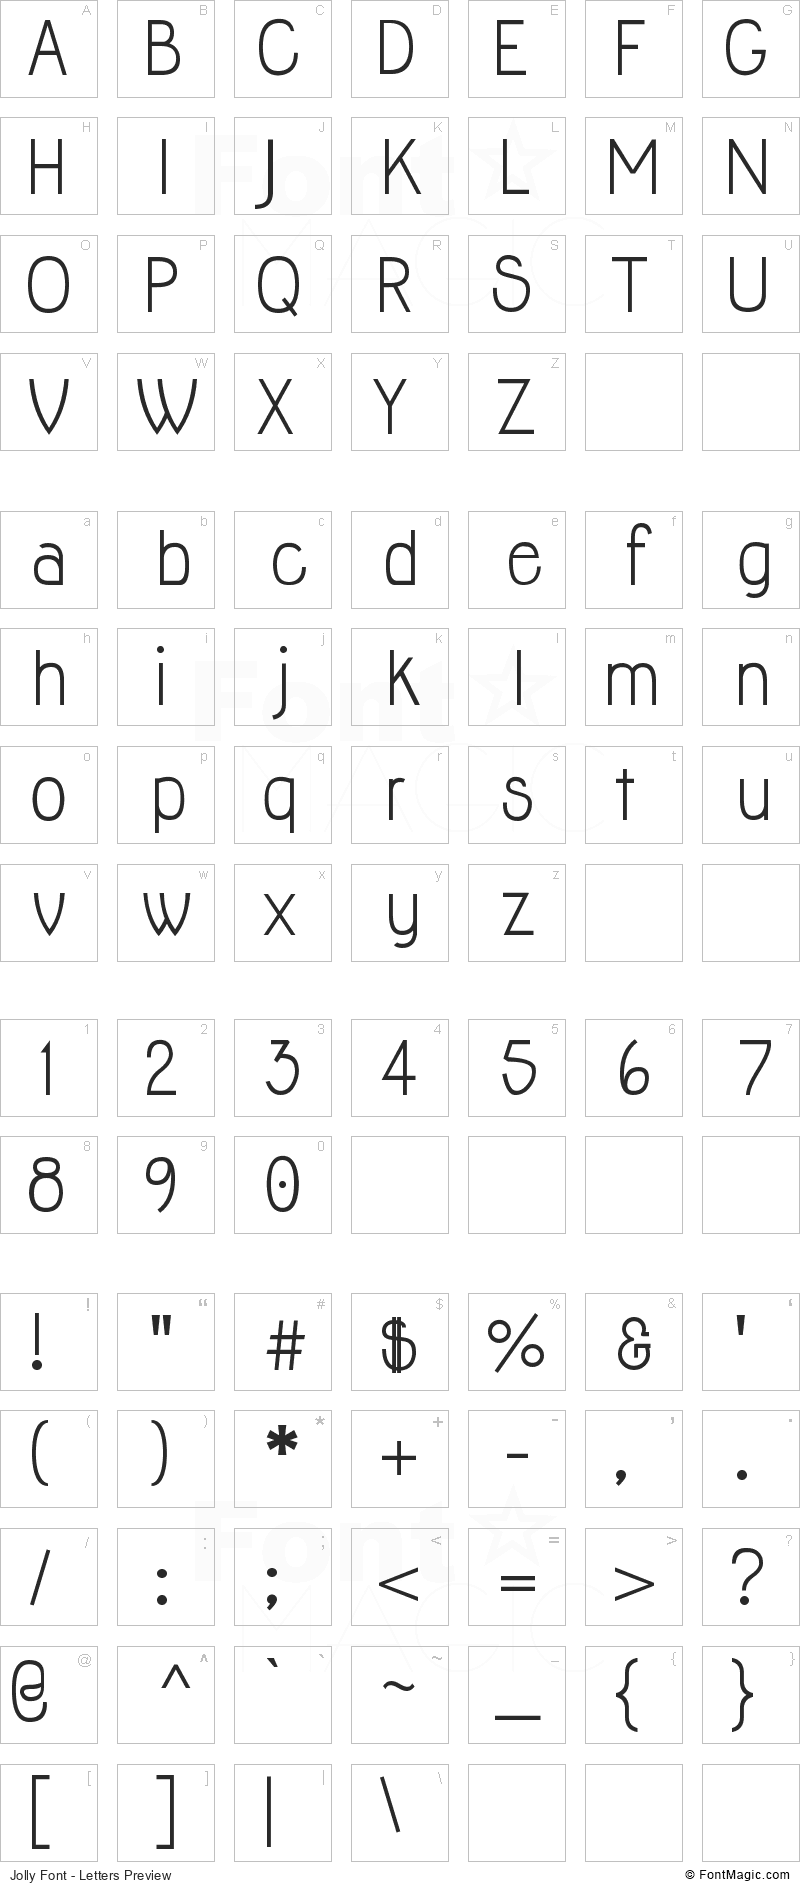 Jolly Font - All Latters Preview Chart